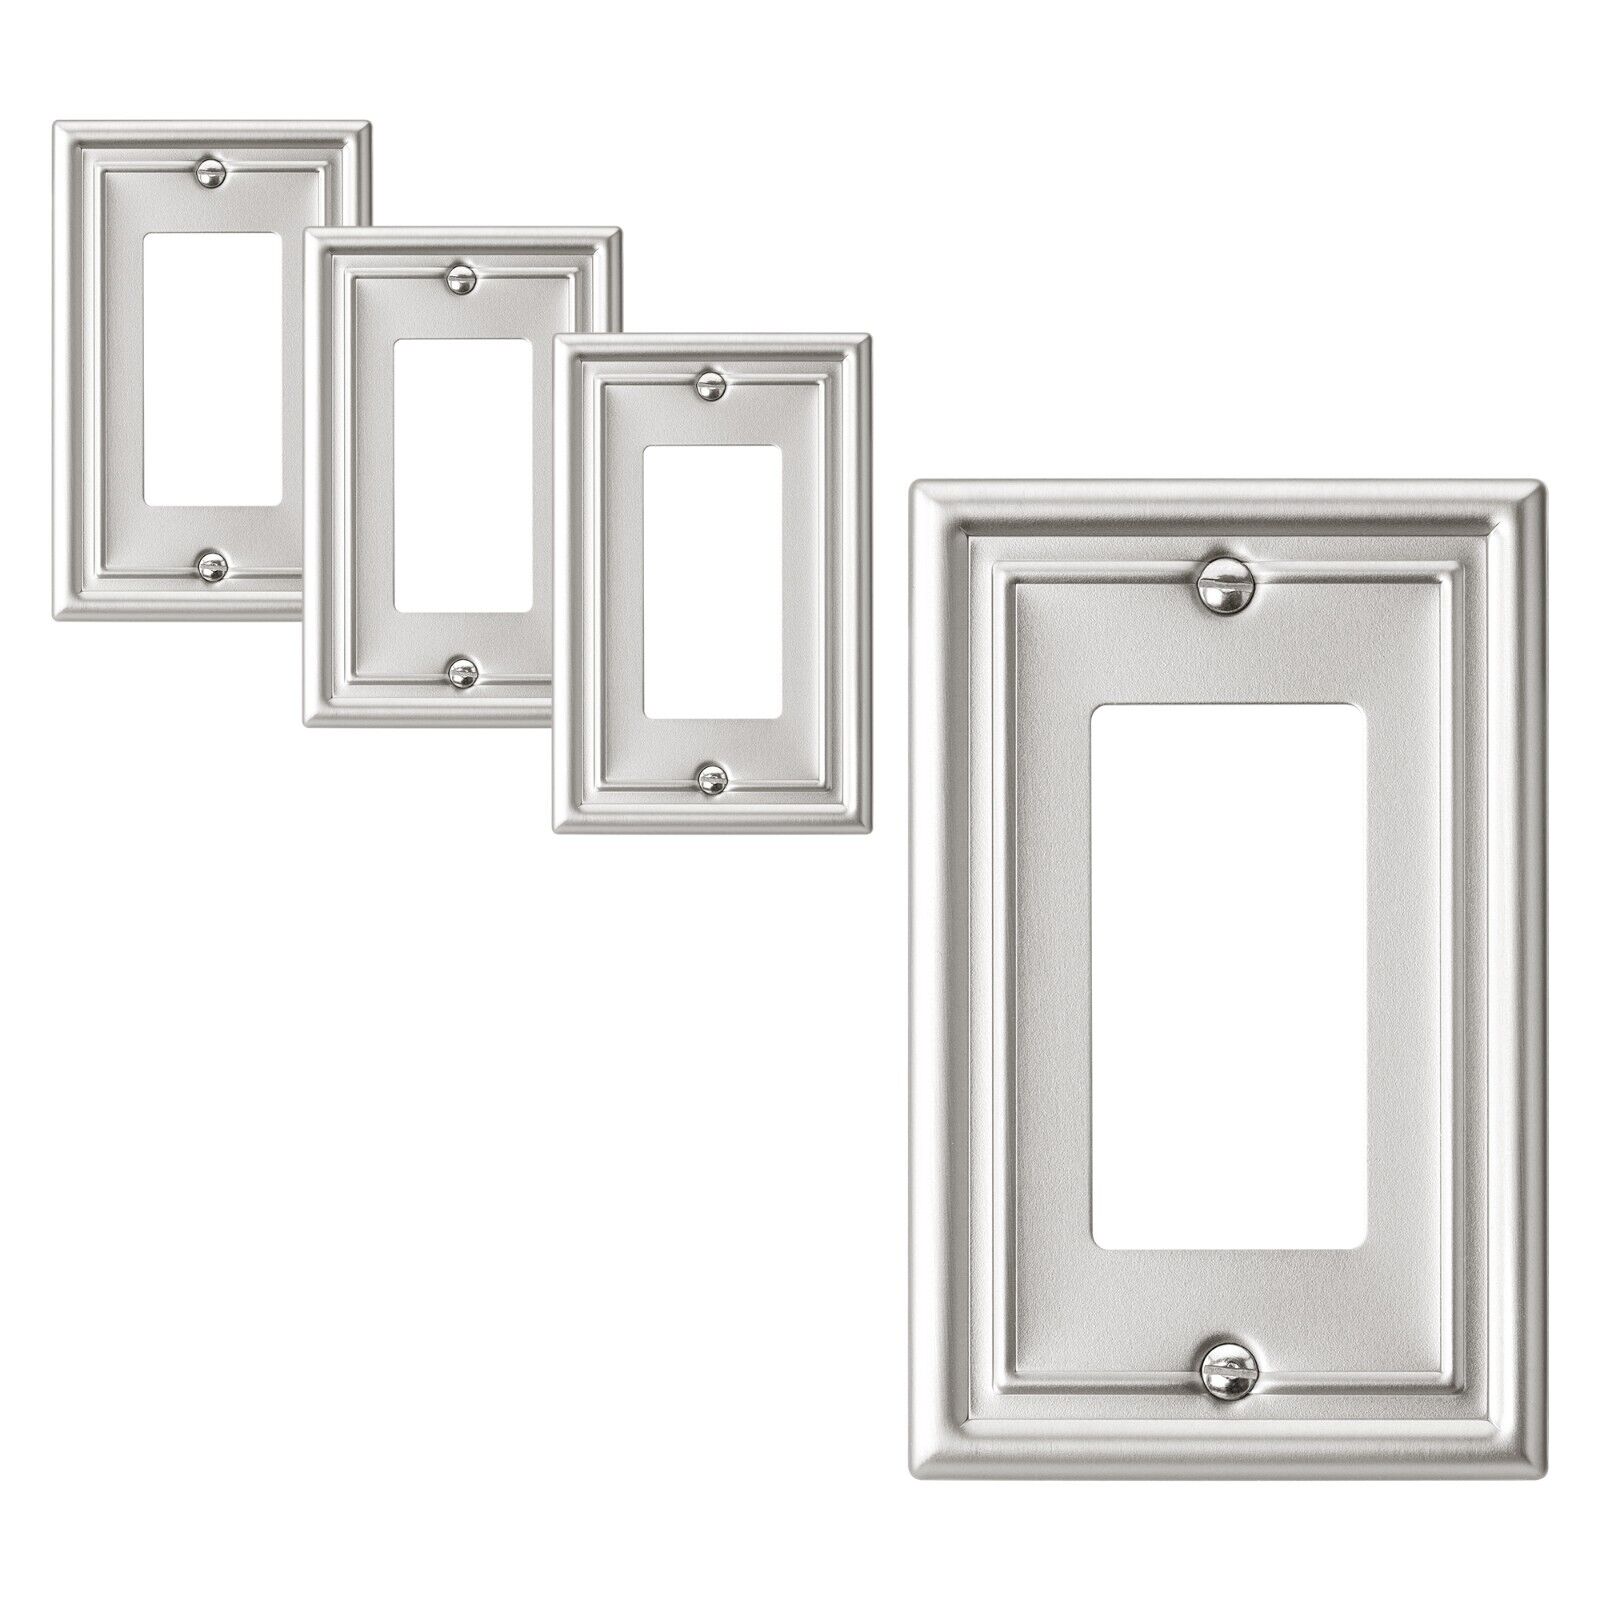 DEWENWILS Brushed Nickel Outlet Covers, Metal decorator Wall Plates for Electric